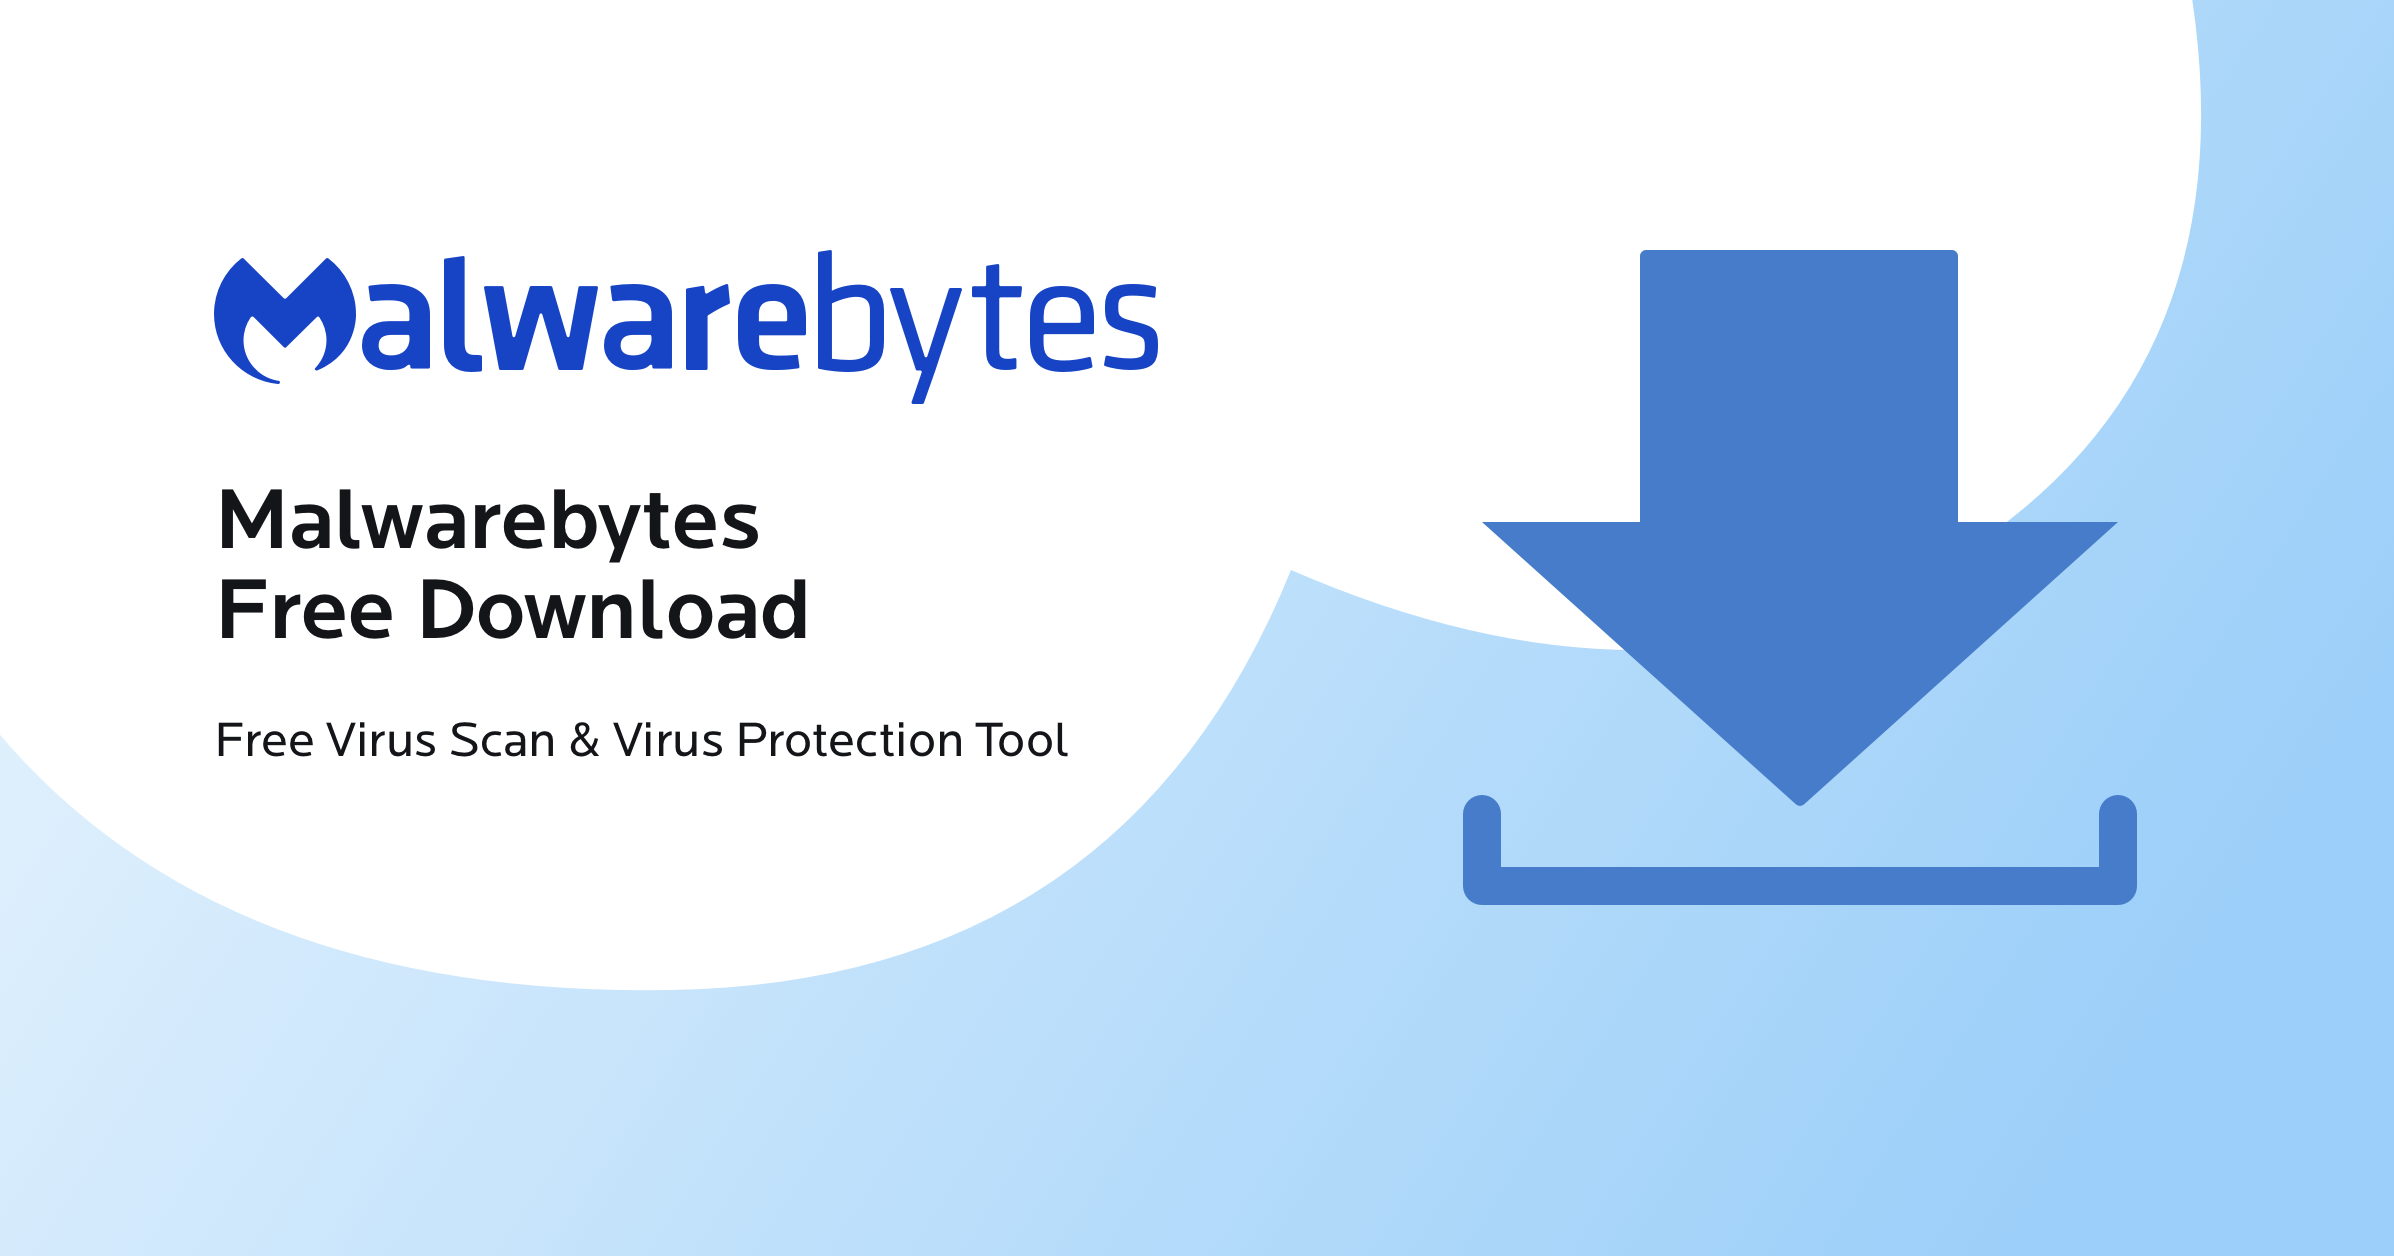 Download and install a trusted malware removal tool, such as Malwarebytes.
Run a full system scan with the malware removal tool and remove any detected threats.